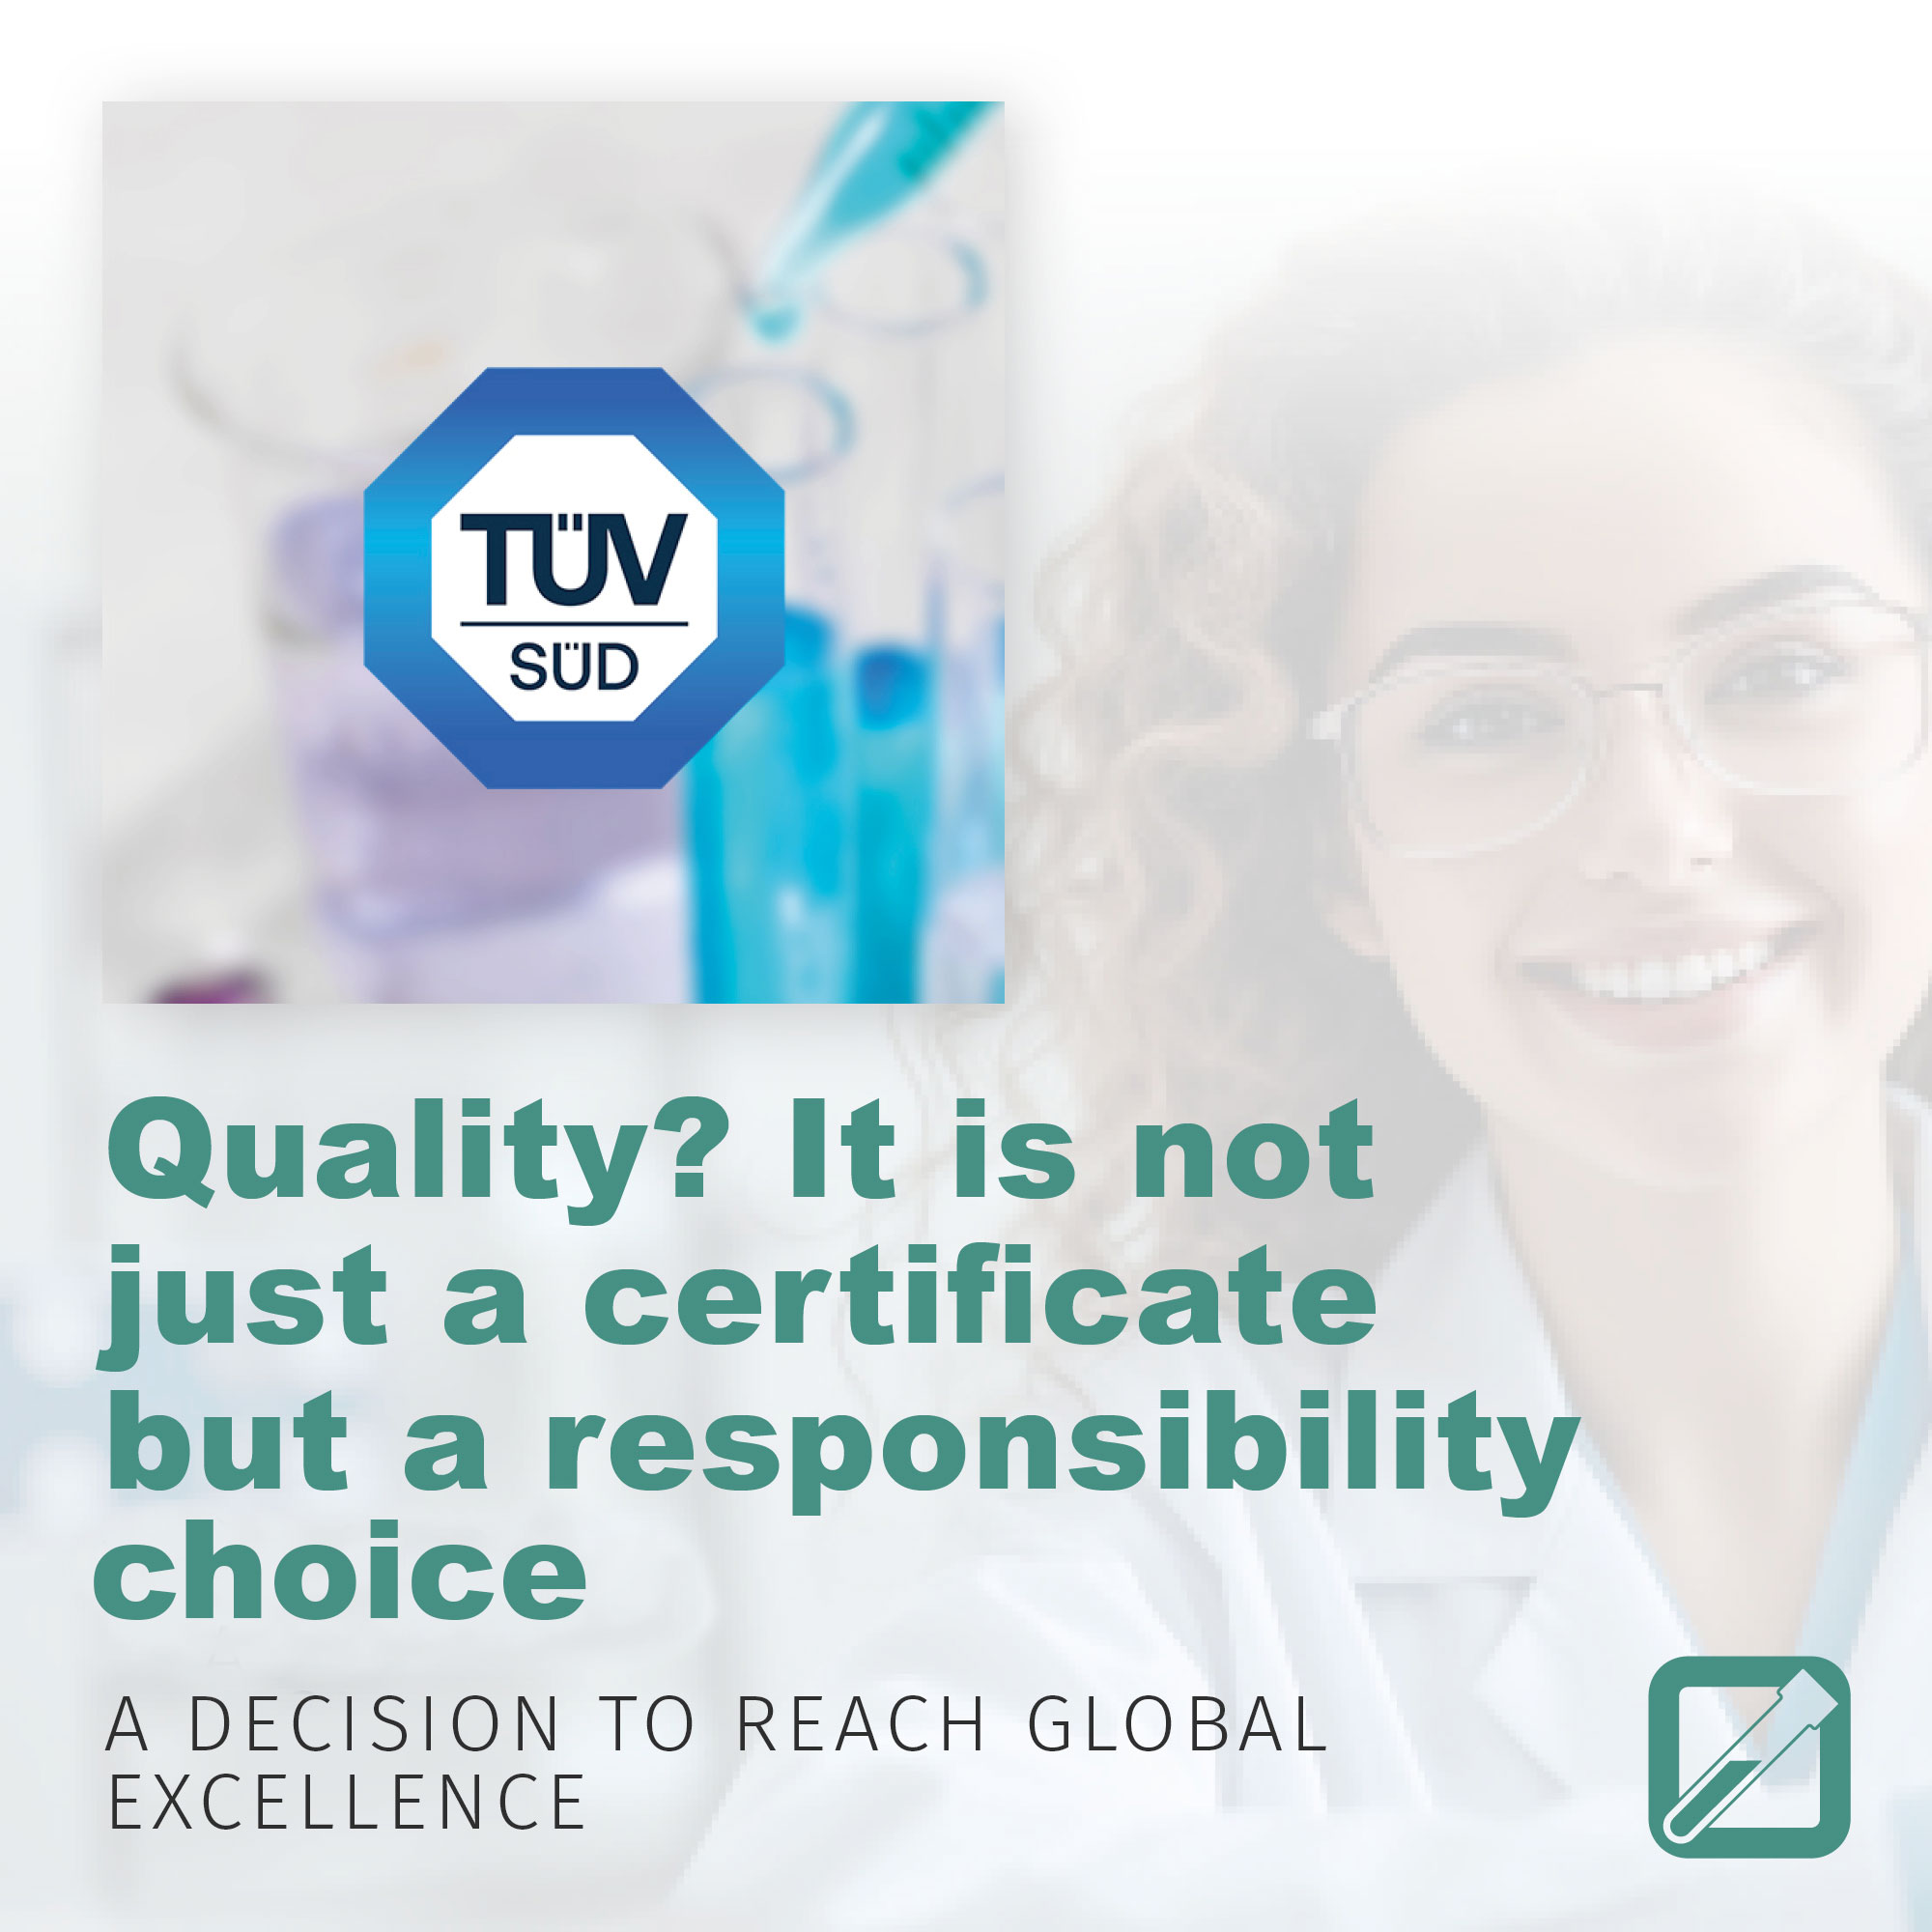 Quality? It is not just a certificate but a responsibility choice. A decision to reach global excellence